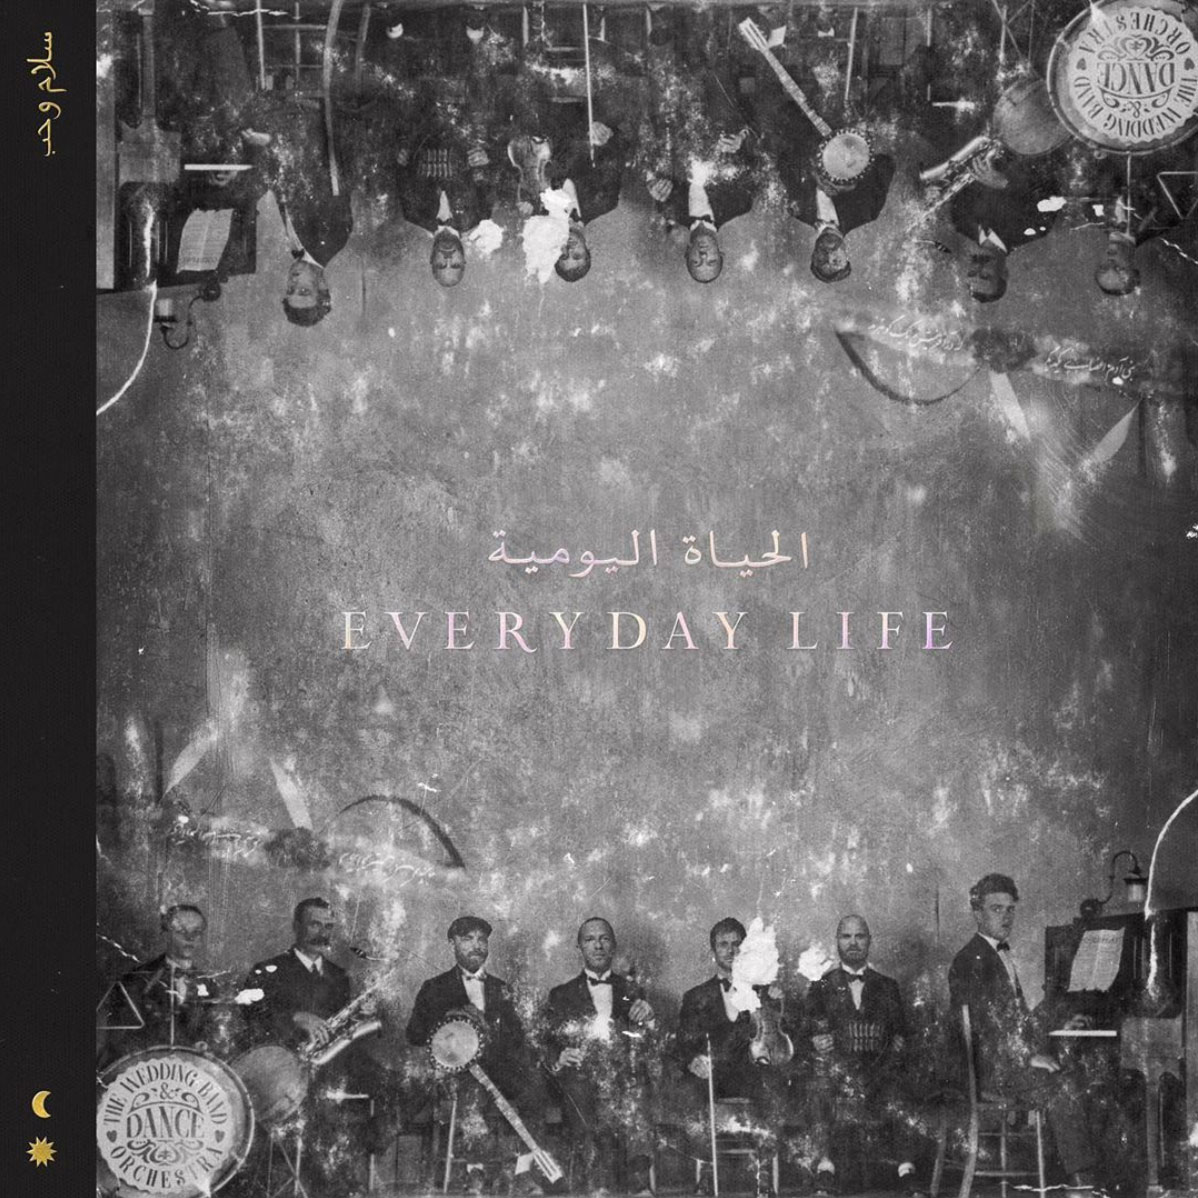 COLDPLAY chooses Jordan to release their first album in four years “Everyday Life” on November 22, in Amman 